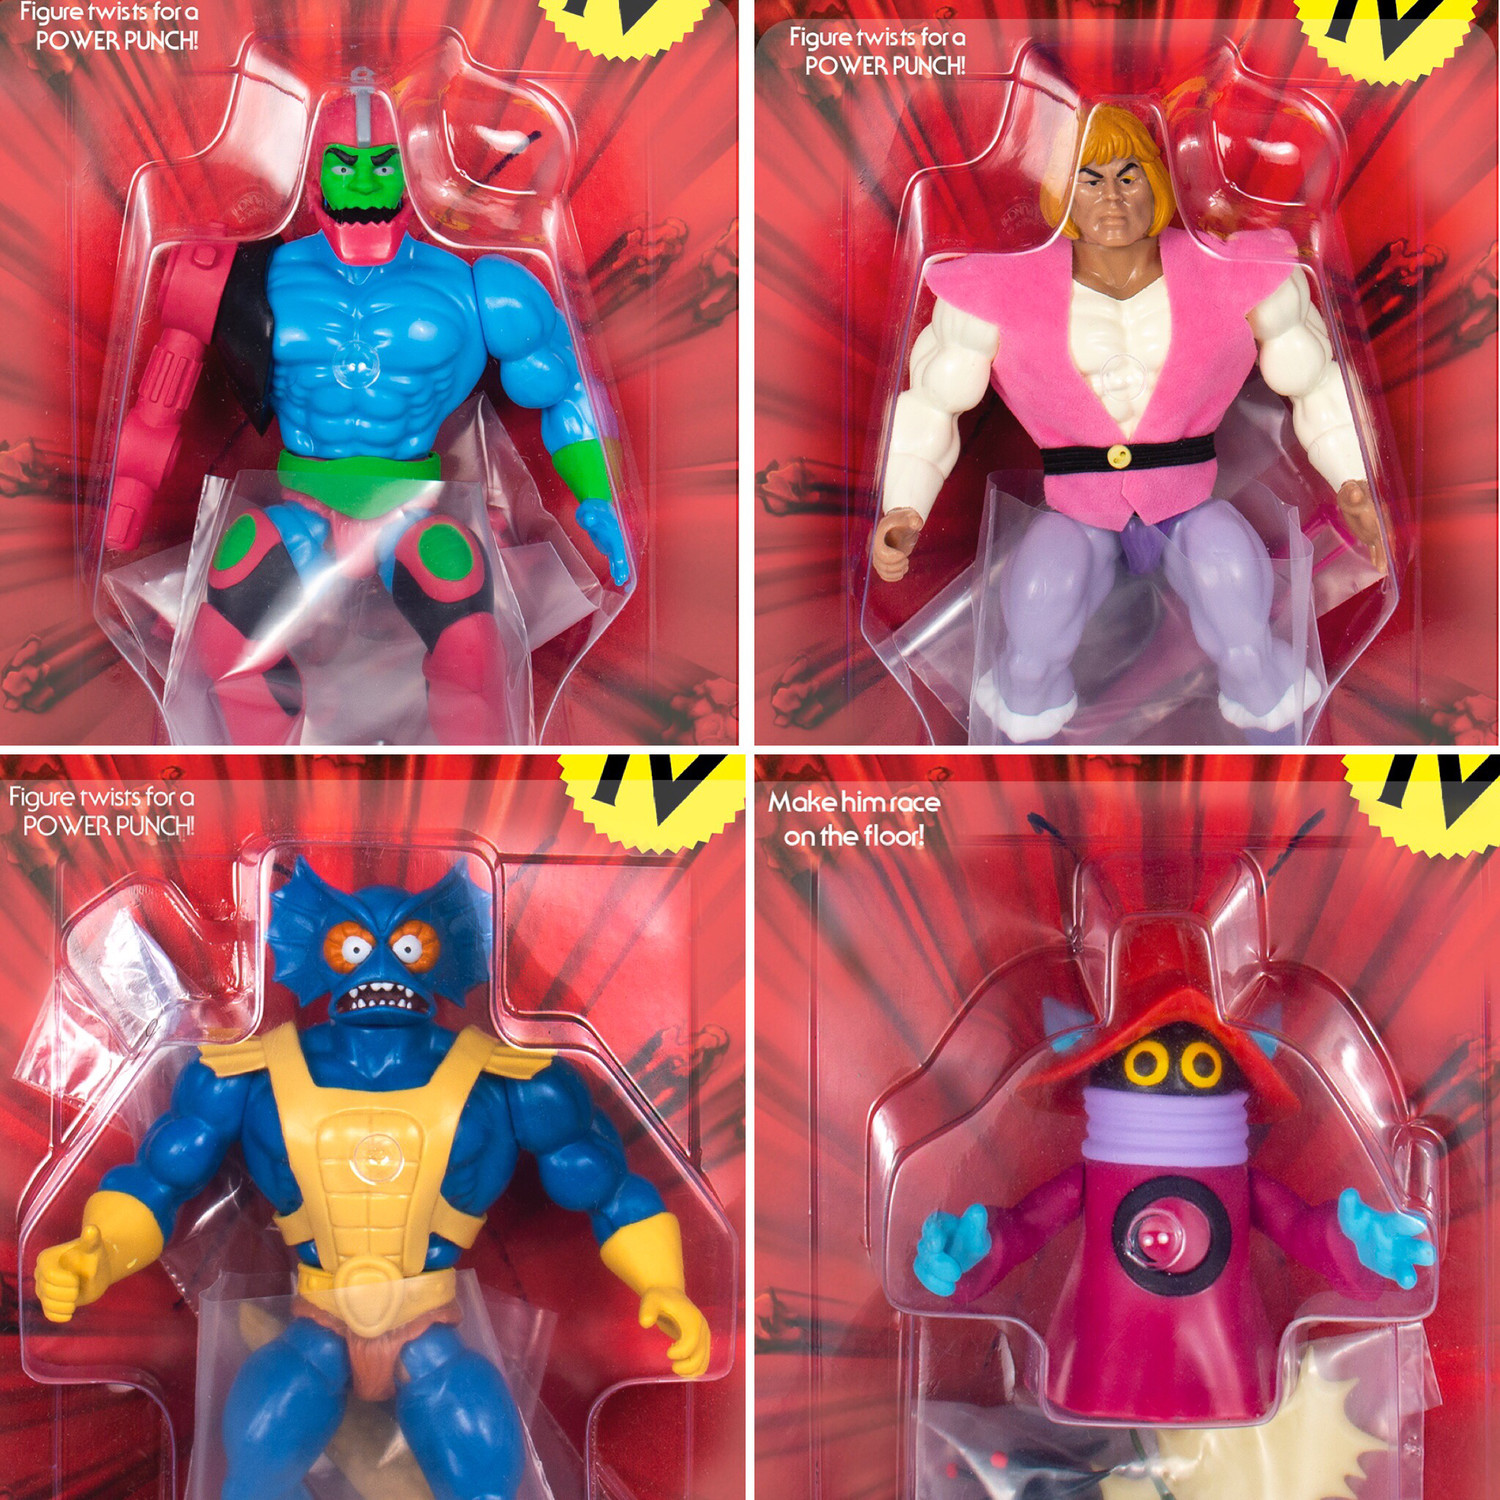 super 7 masters of the universe wave 3